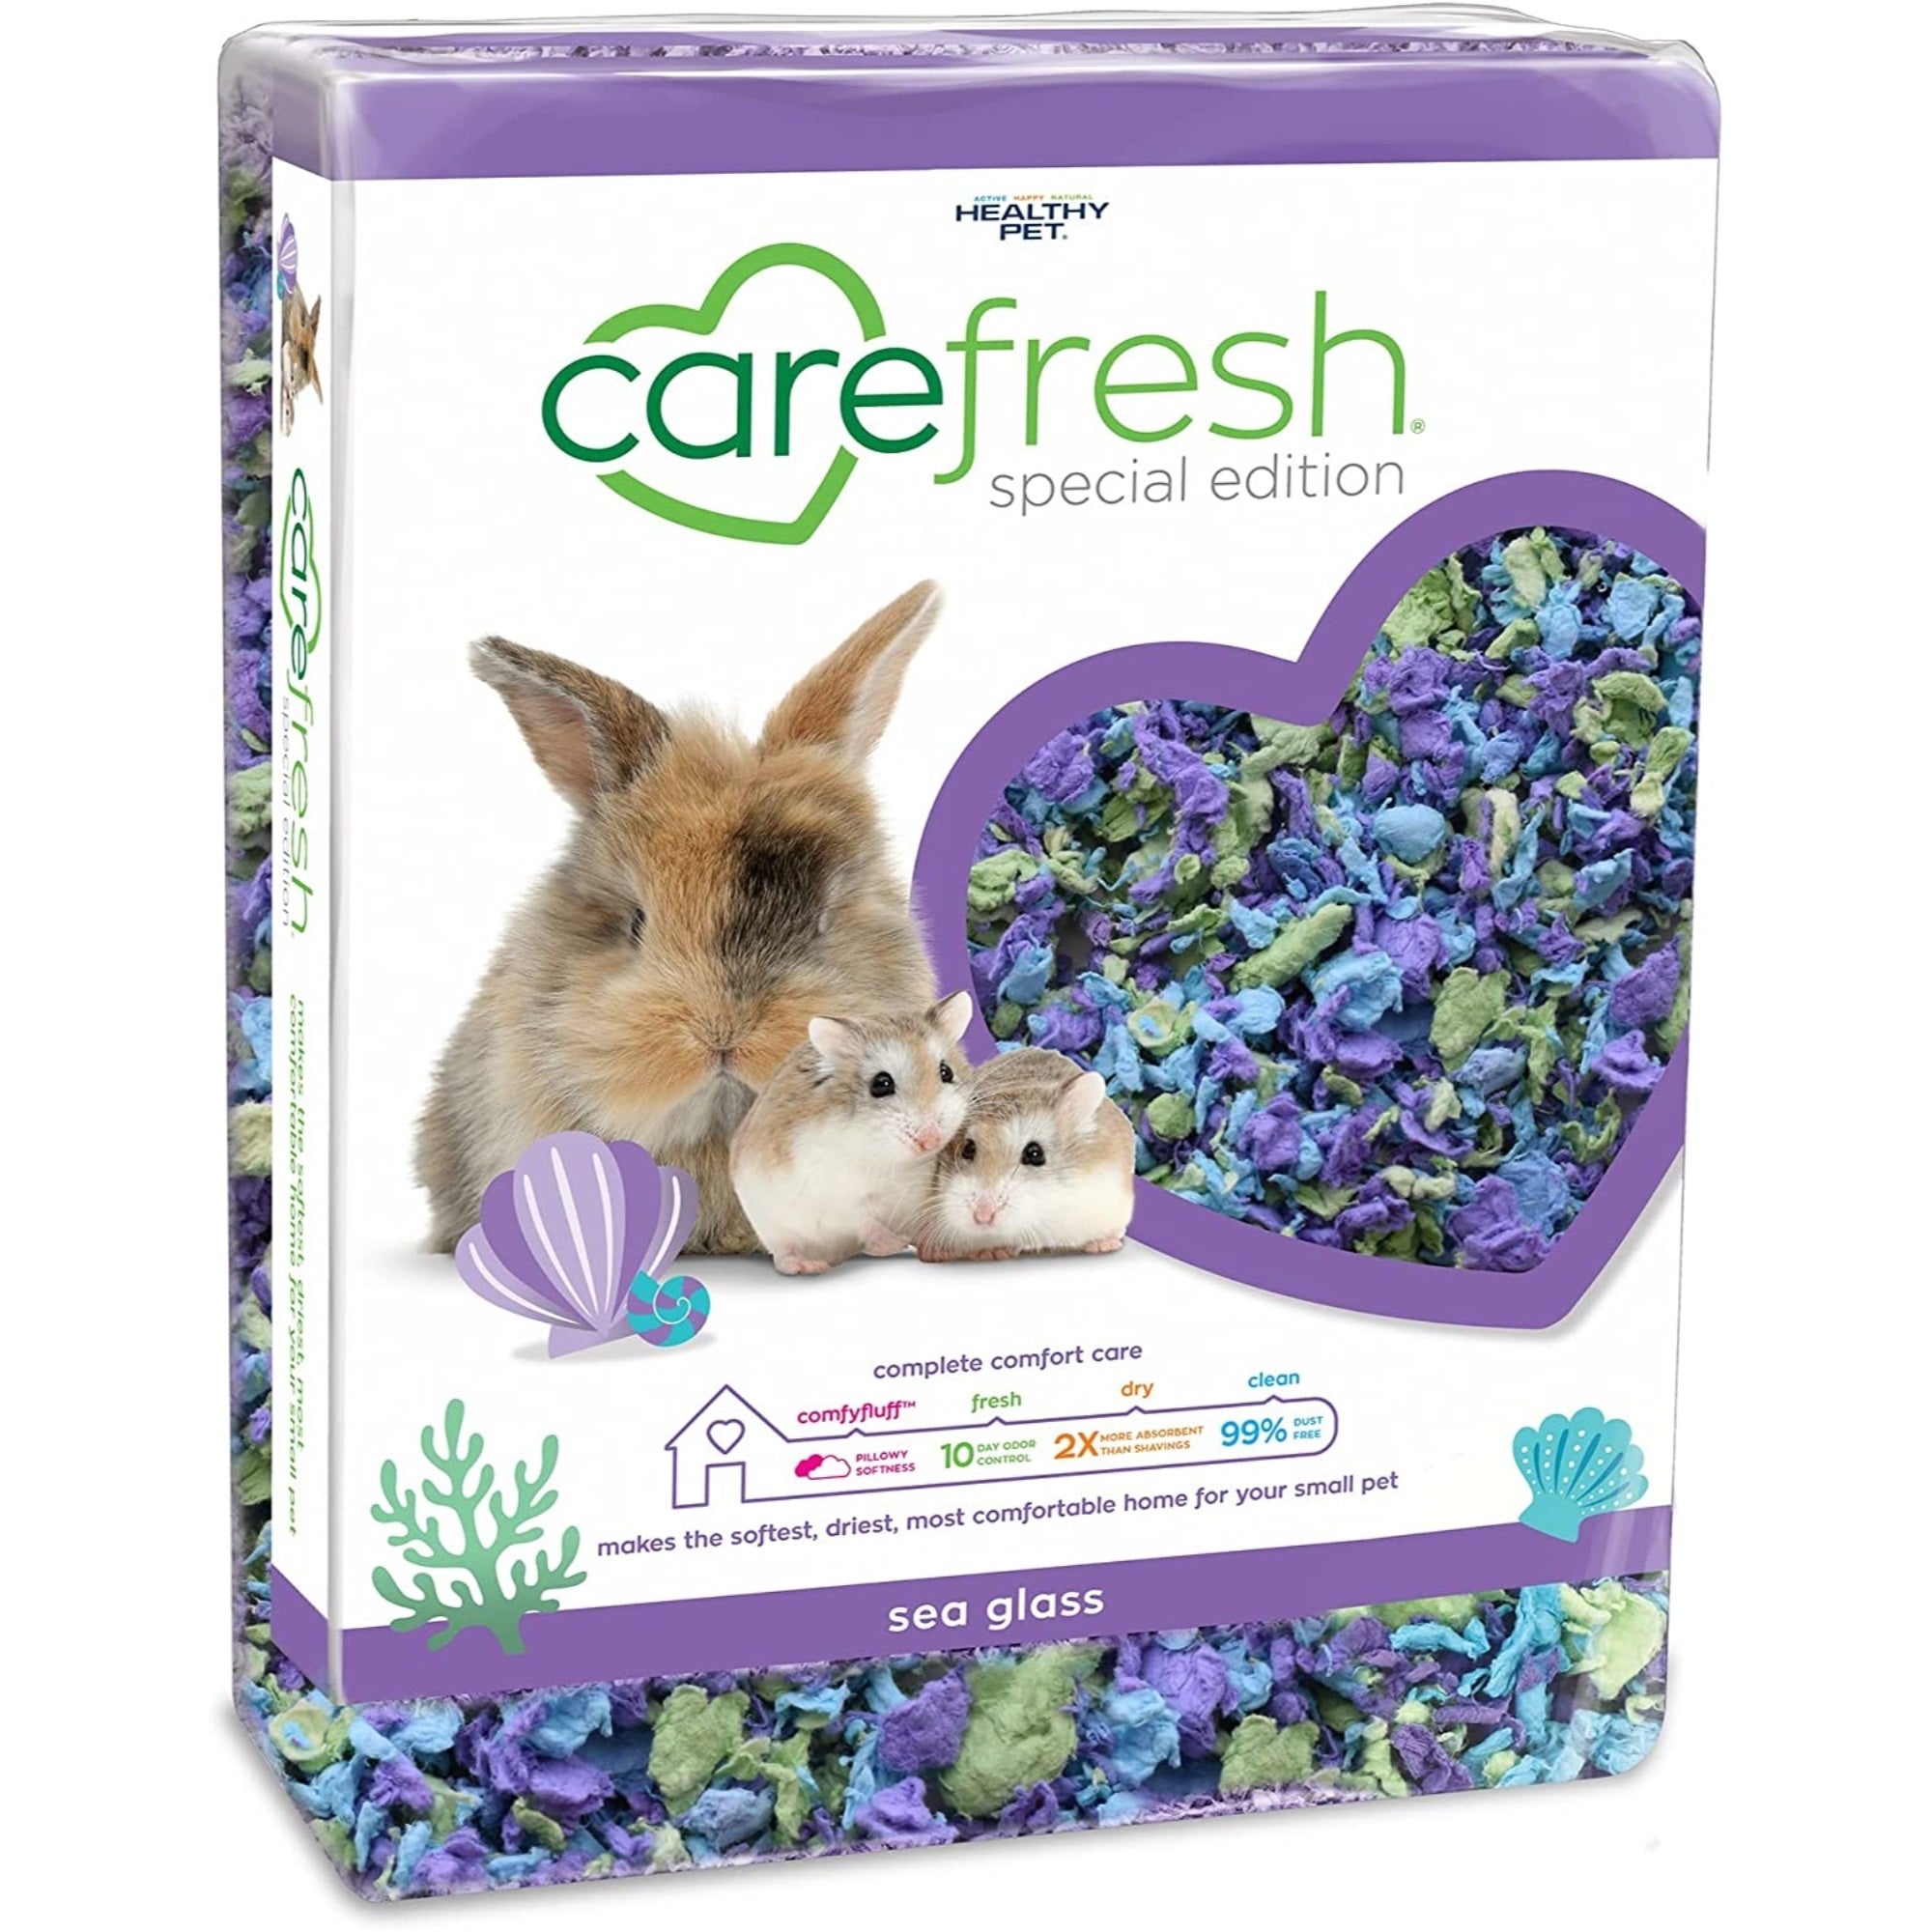 Carefresh Natural Paper Small Pet Bedding with Odor Control, Sea Glass, 50 L